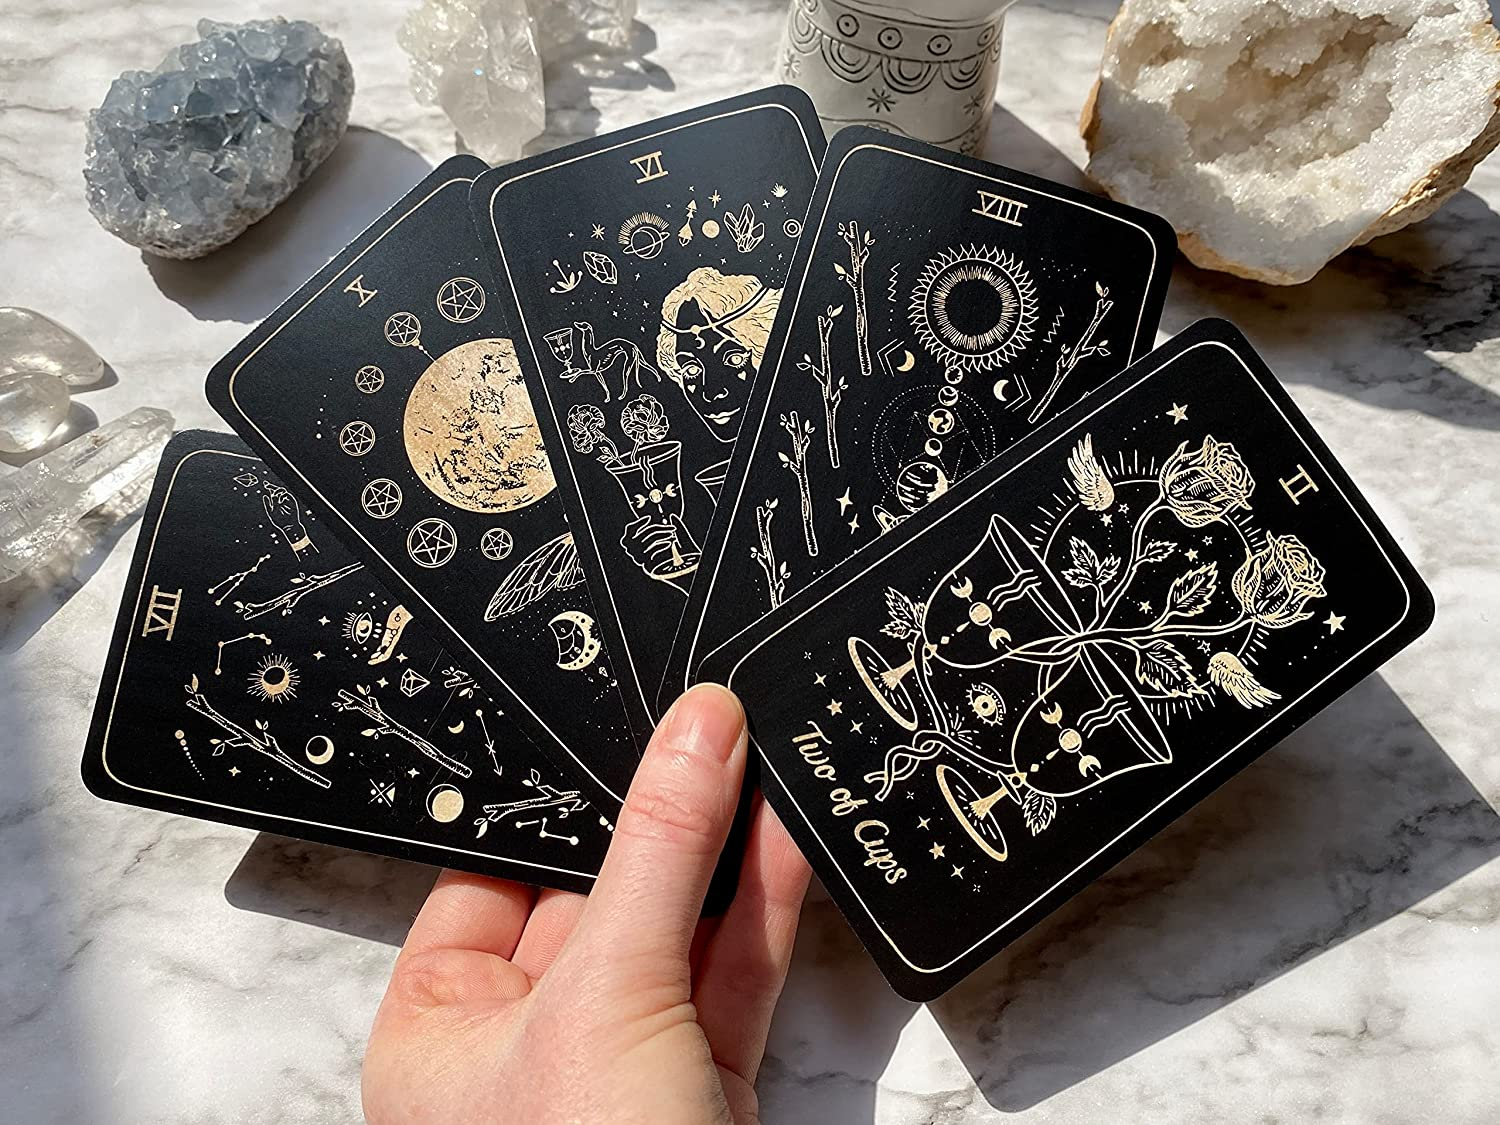 Luna Somnia Tarot Deck with Guidebook & Box - 78 Cards Complete Full Deck - Moon Dreams Starry Celestial Astrology Witchy Black Gold Divination Tool